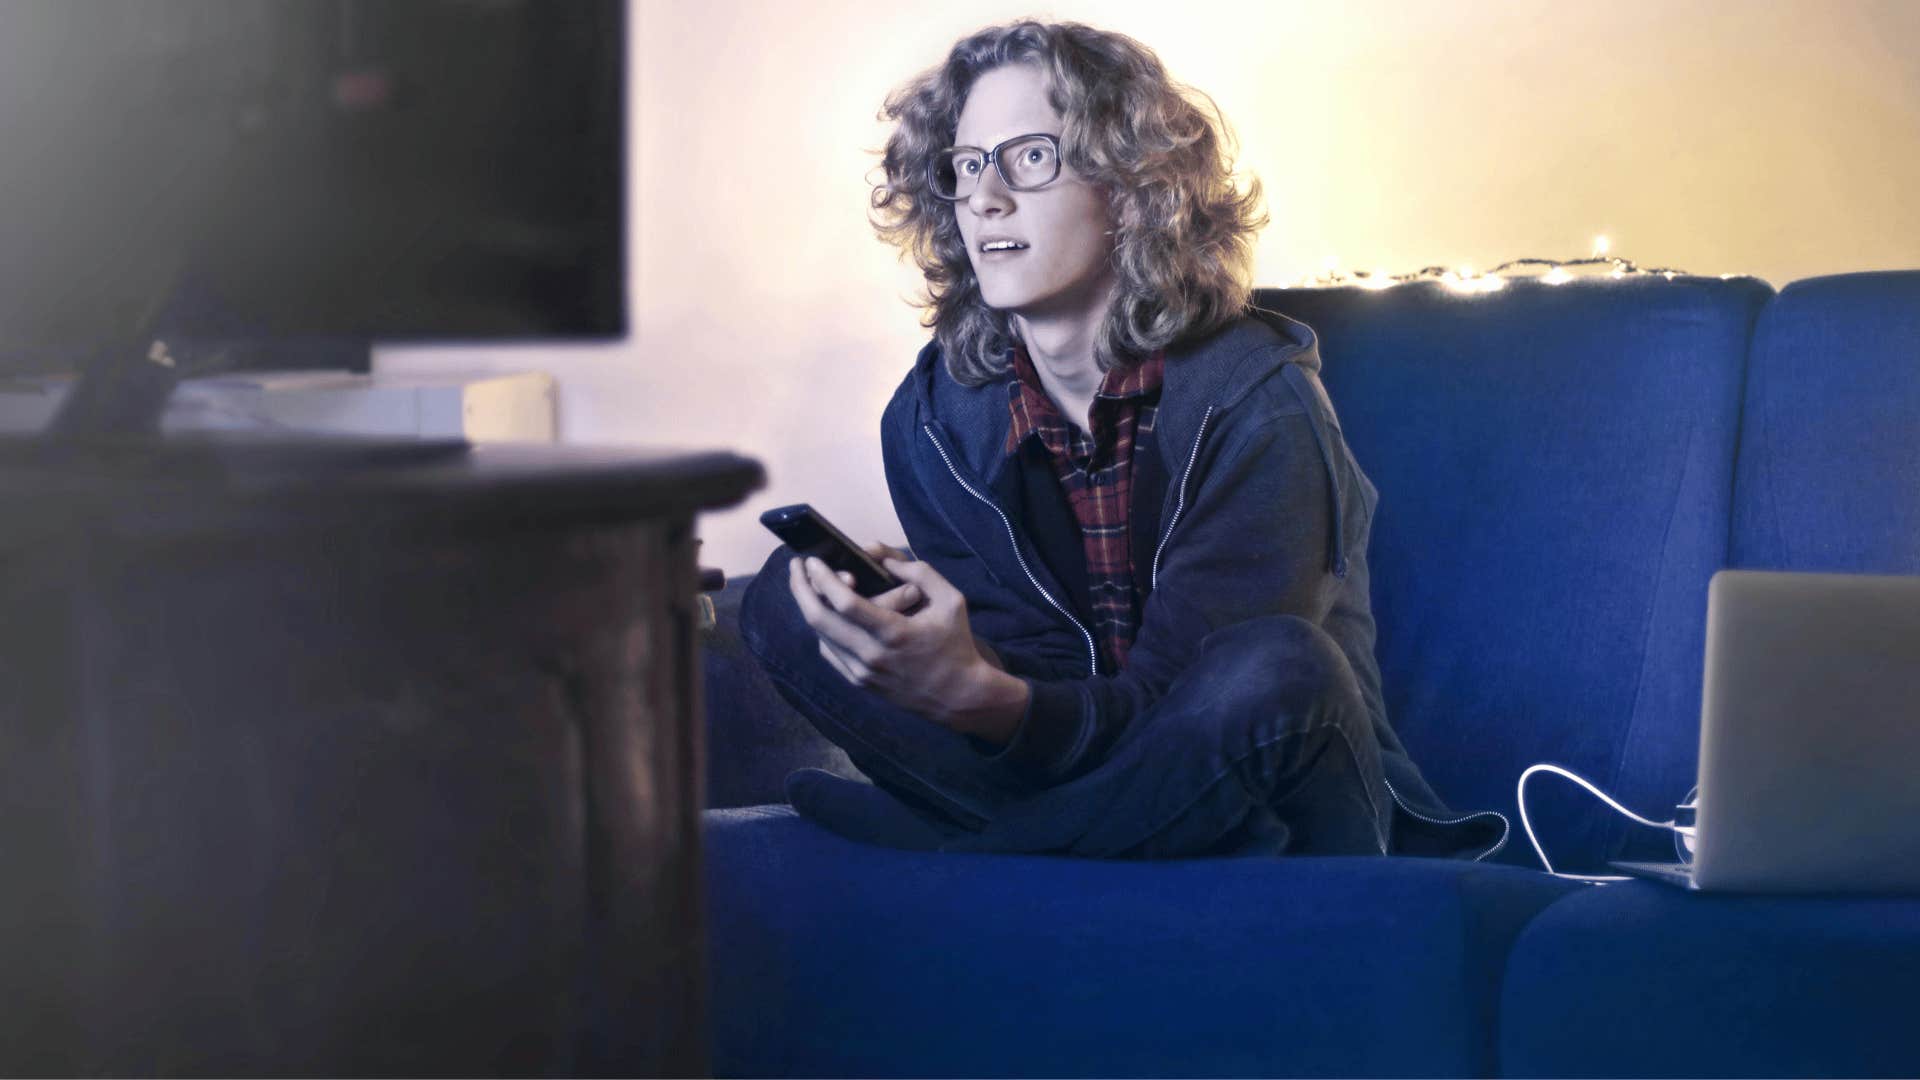 man watching videos on a television